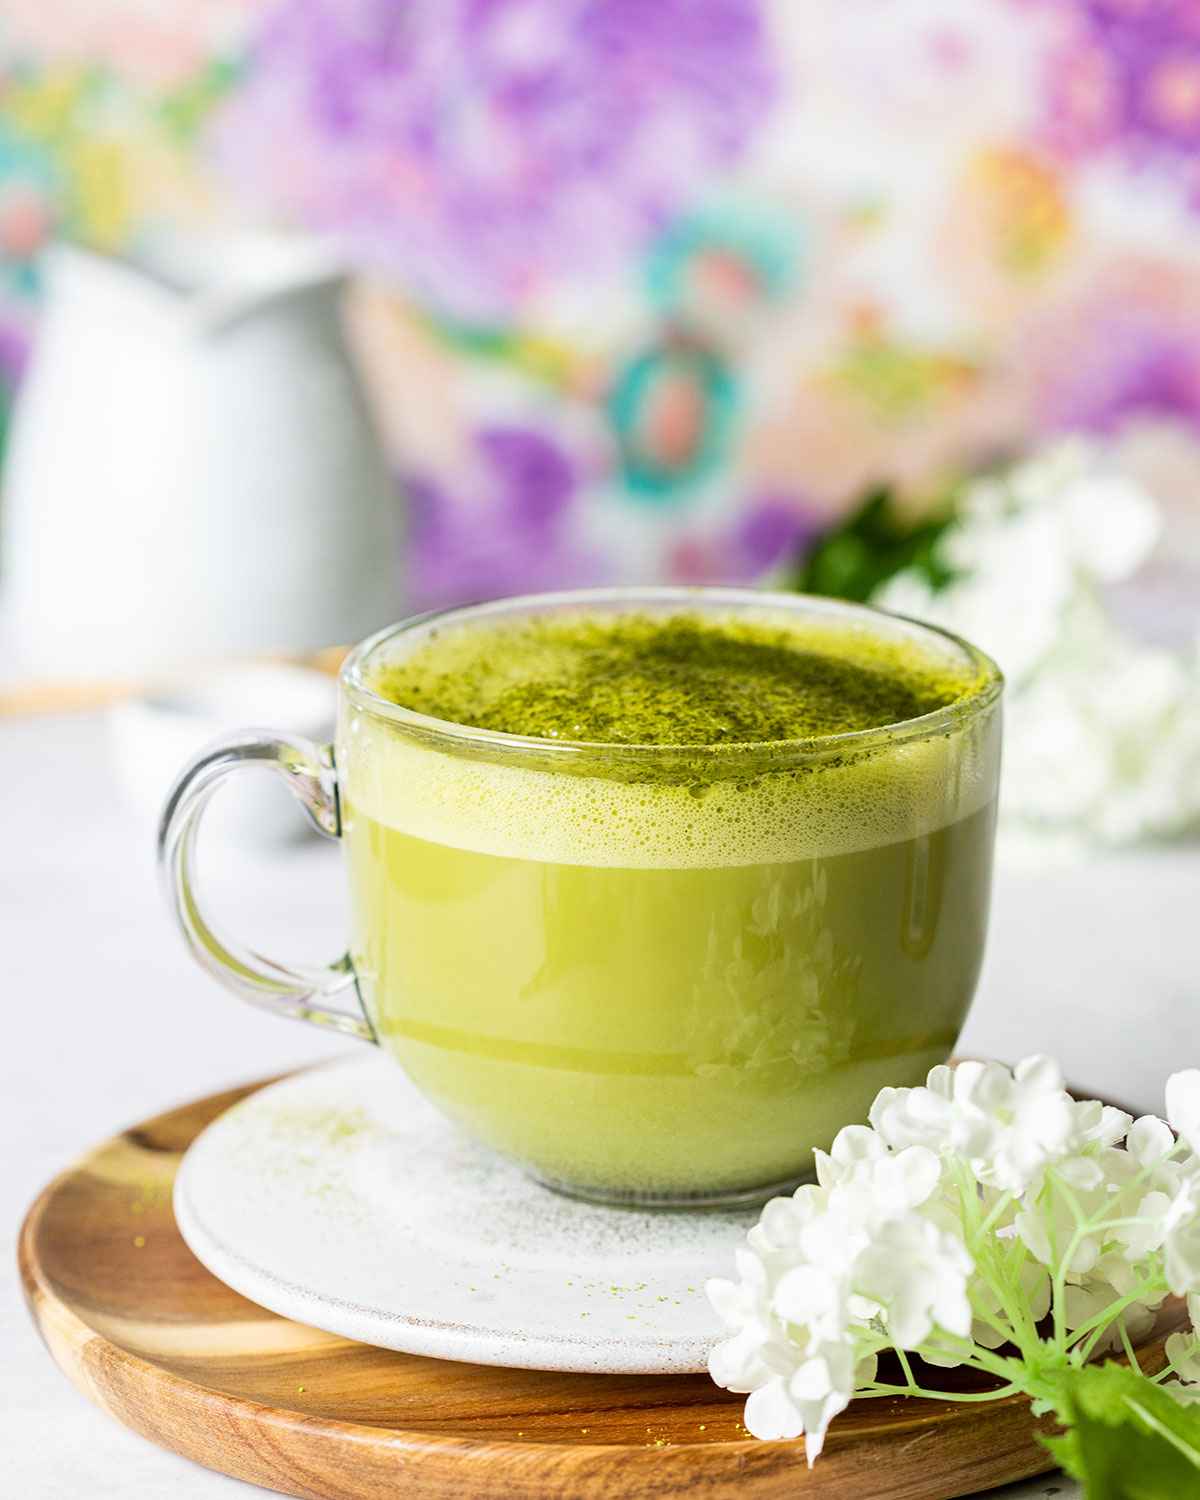 starbucks style matcha latte in a glass mug surrounded by white flowers and a milk jug blurry in the background